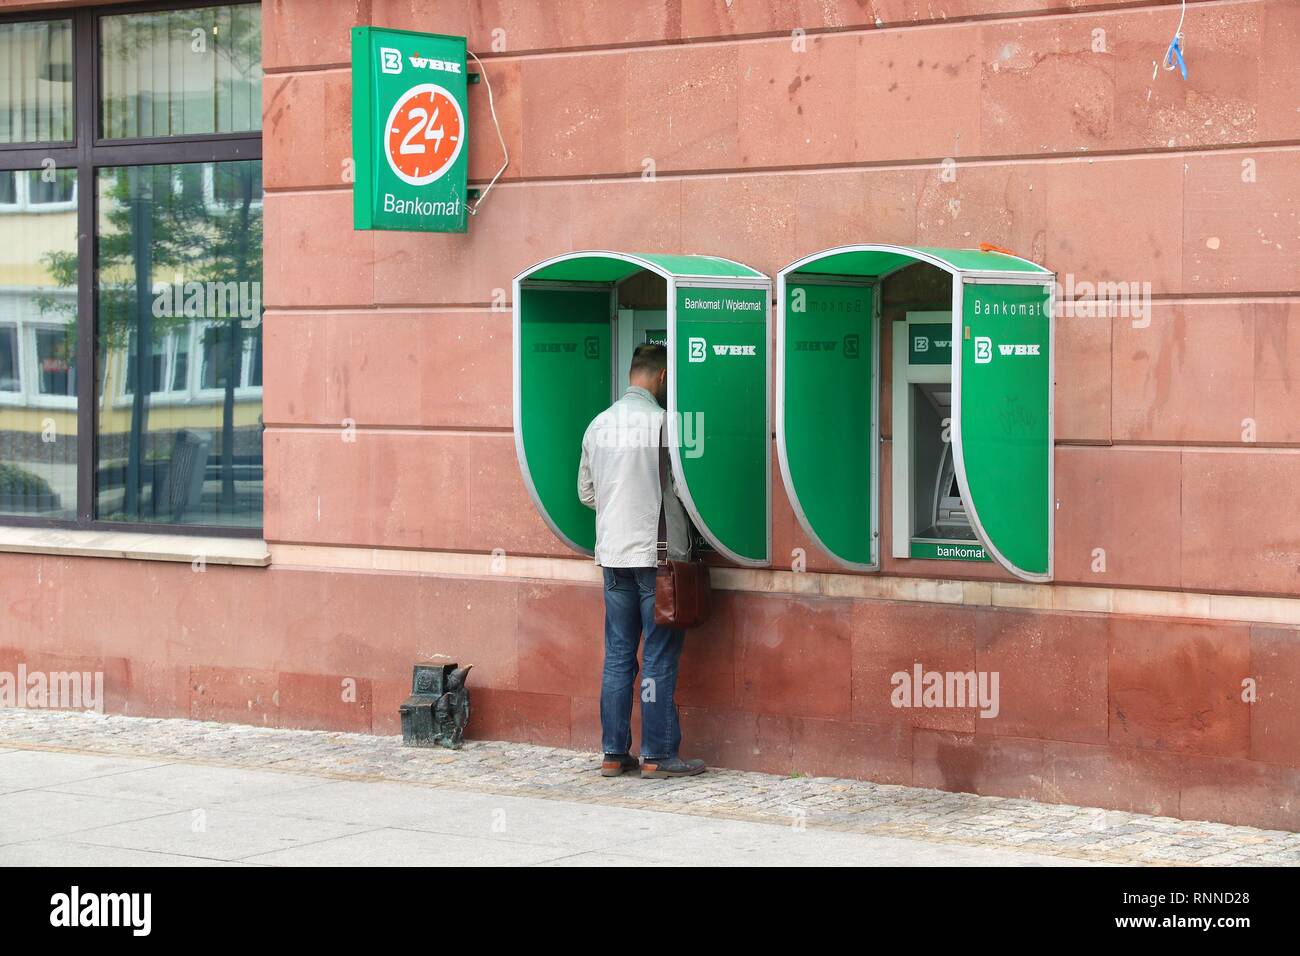 WROCLAW, POLAND - MAY 11, 2018: Person uses ATM of Bank Zachodni WBK branch in Wroclaw, Poland. There are 36 banking companies present in Poland (2018 Stock Photo